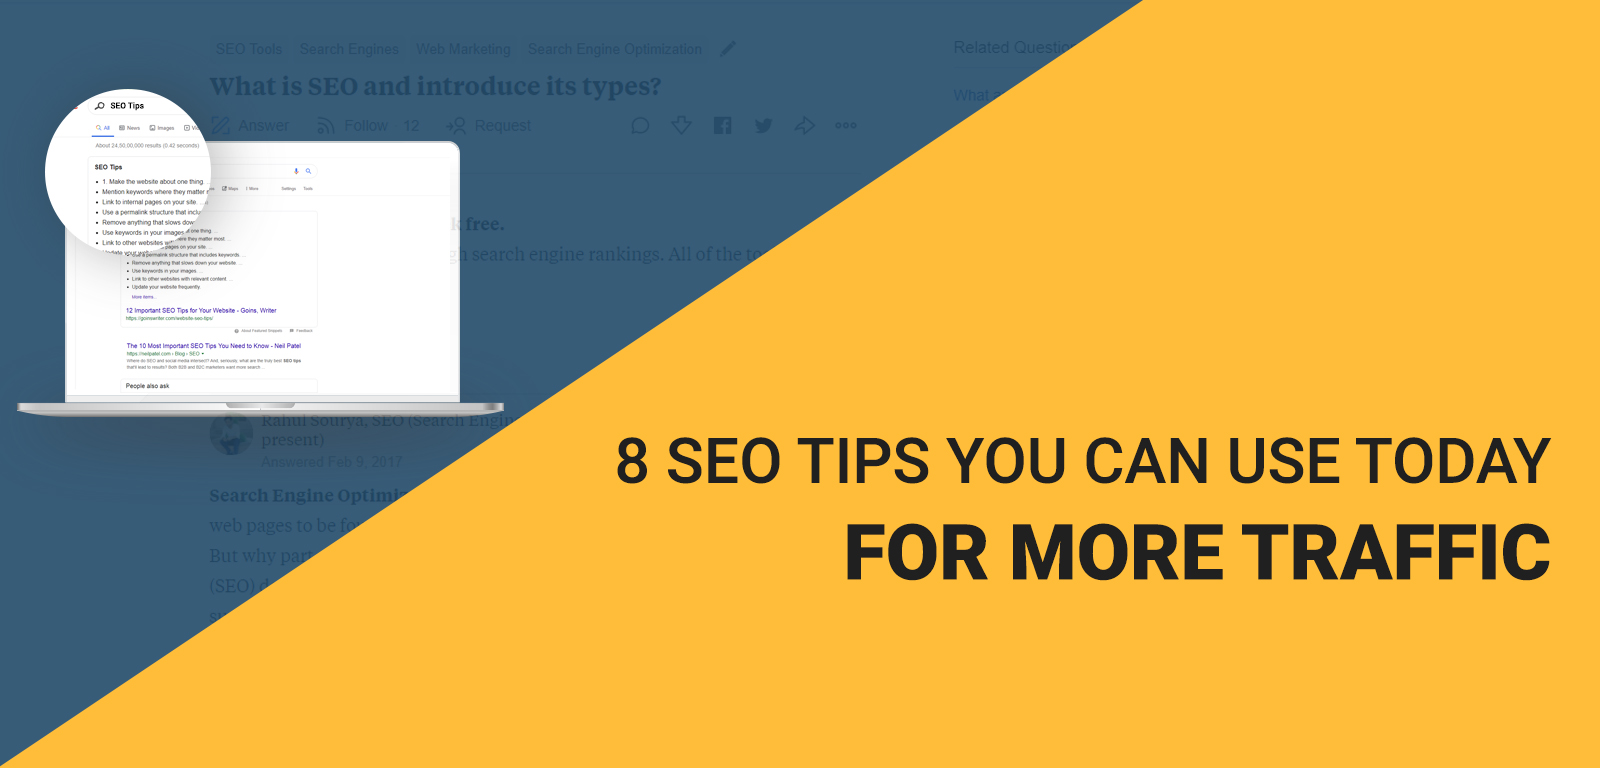 8 SEO tips you can use today for more traffic